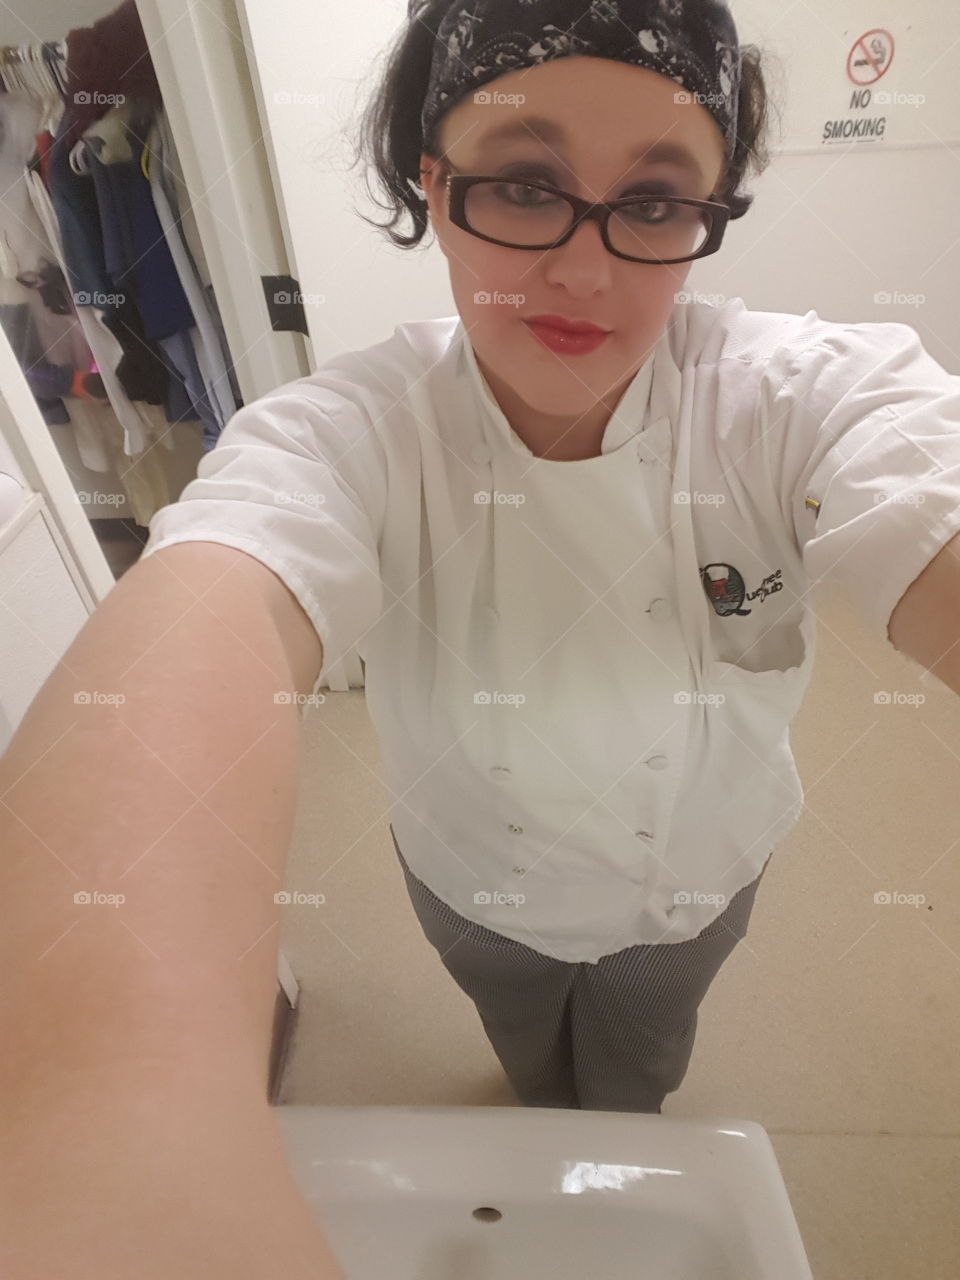 working girl selfie with makeup, glasses, pigtails, and chef jacket